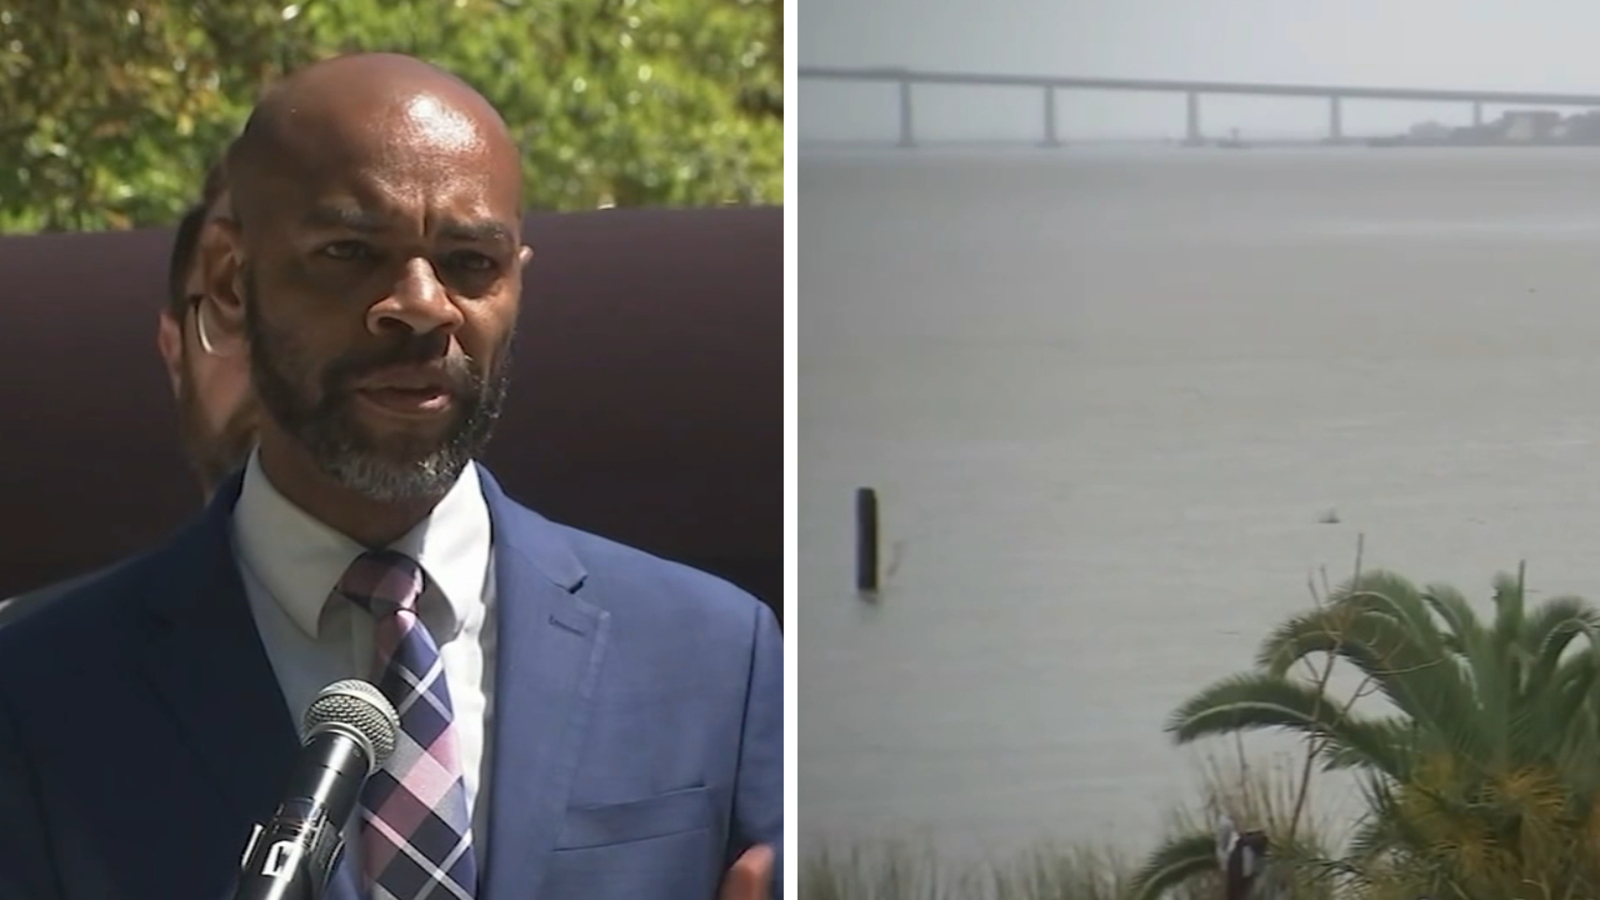 Antioch Mayor Lamar Hernandez-Thorpe hopes city’s deep water port will attract investors in trip to China [Video]